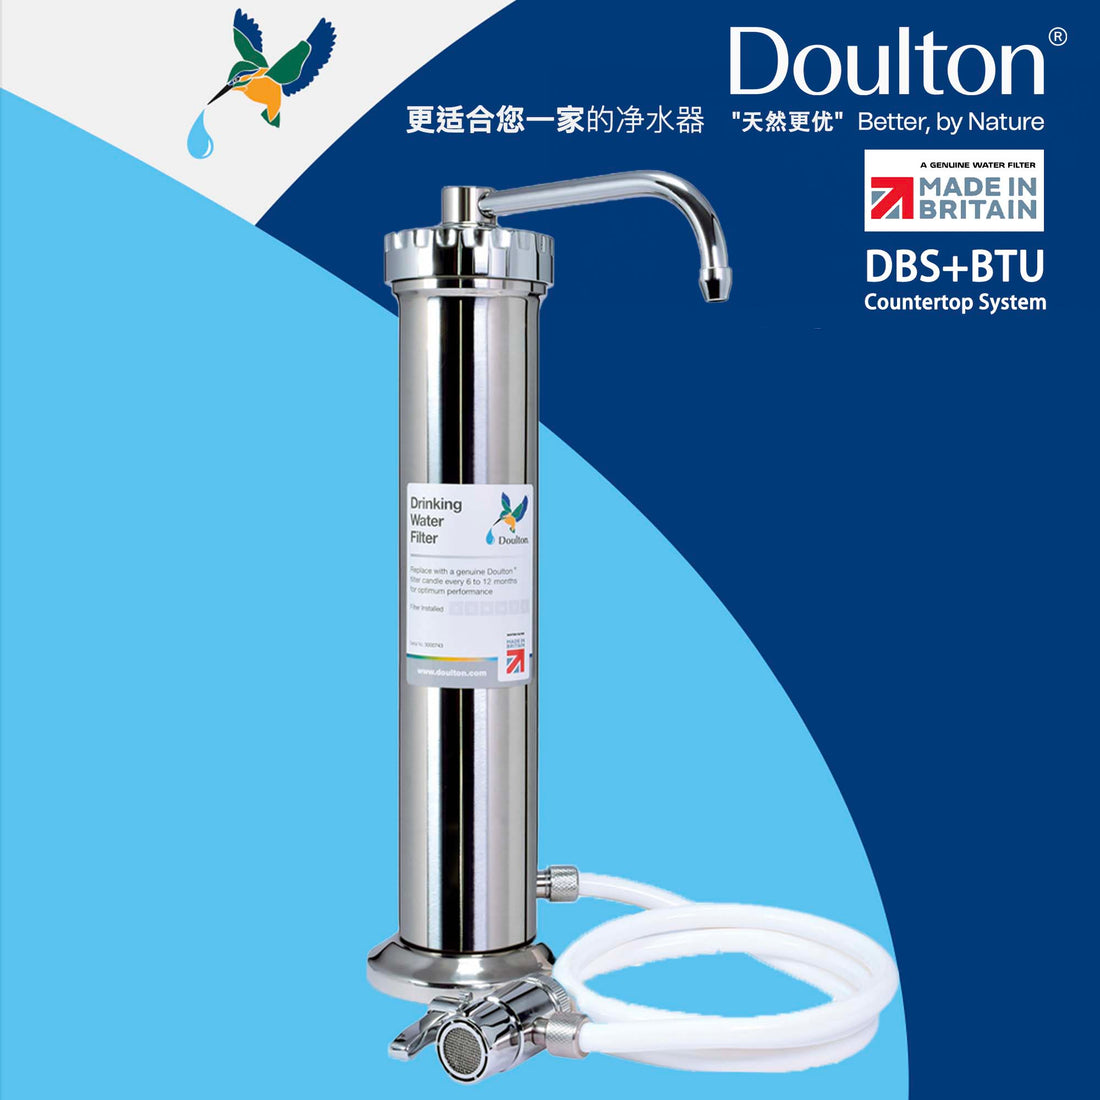 (FREE 1 eXtra BTU Filter, 2nd Year) Experience Ultimate Purity with Doulton DBS Biotect Ultra: The Pinnacle of Eco-Friendly, 4-Stage Advanced Filtration - Crafted with Excellence in Britain! since 1826